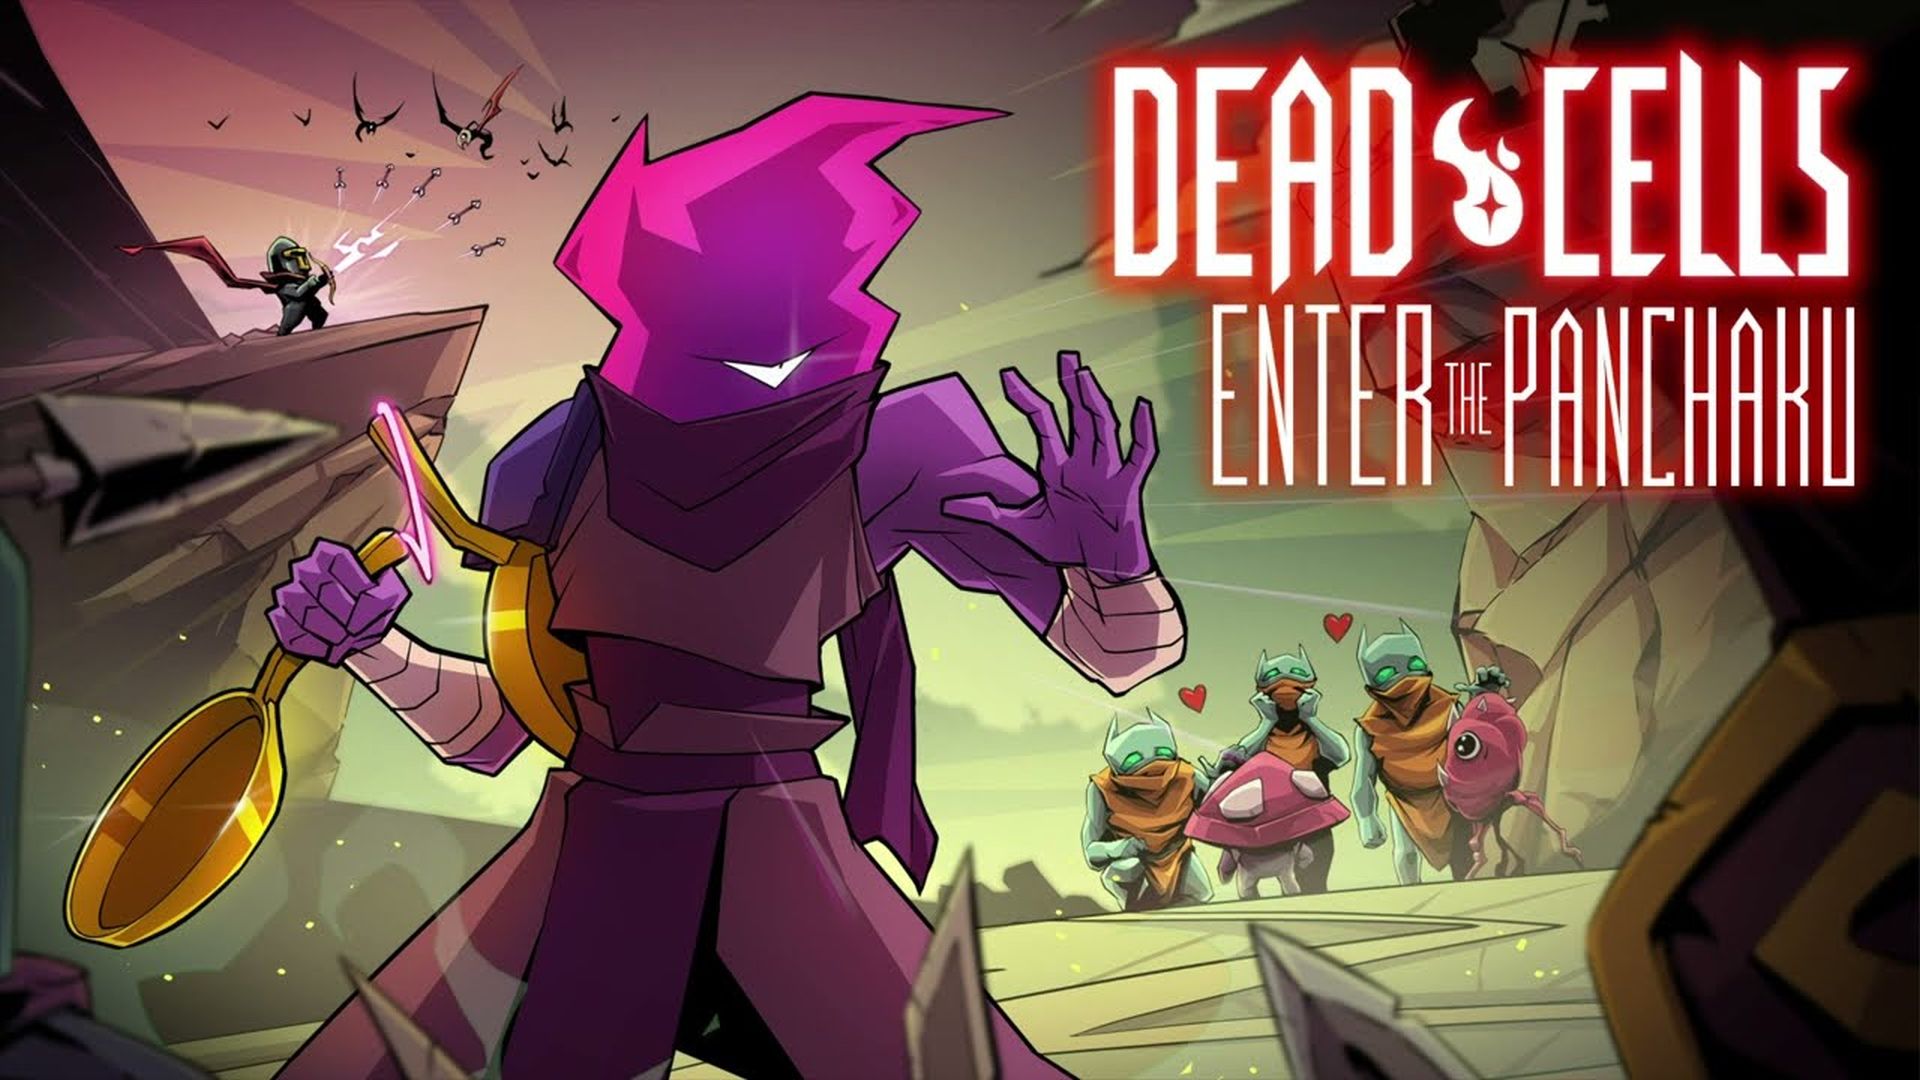 voering Natuur koolhydraat Dead Cells – “Enter the Panchaku” Update is Out Now on PC, Adds New Weapons  and Legendary Affixes